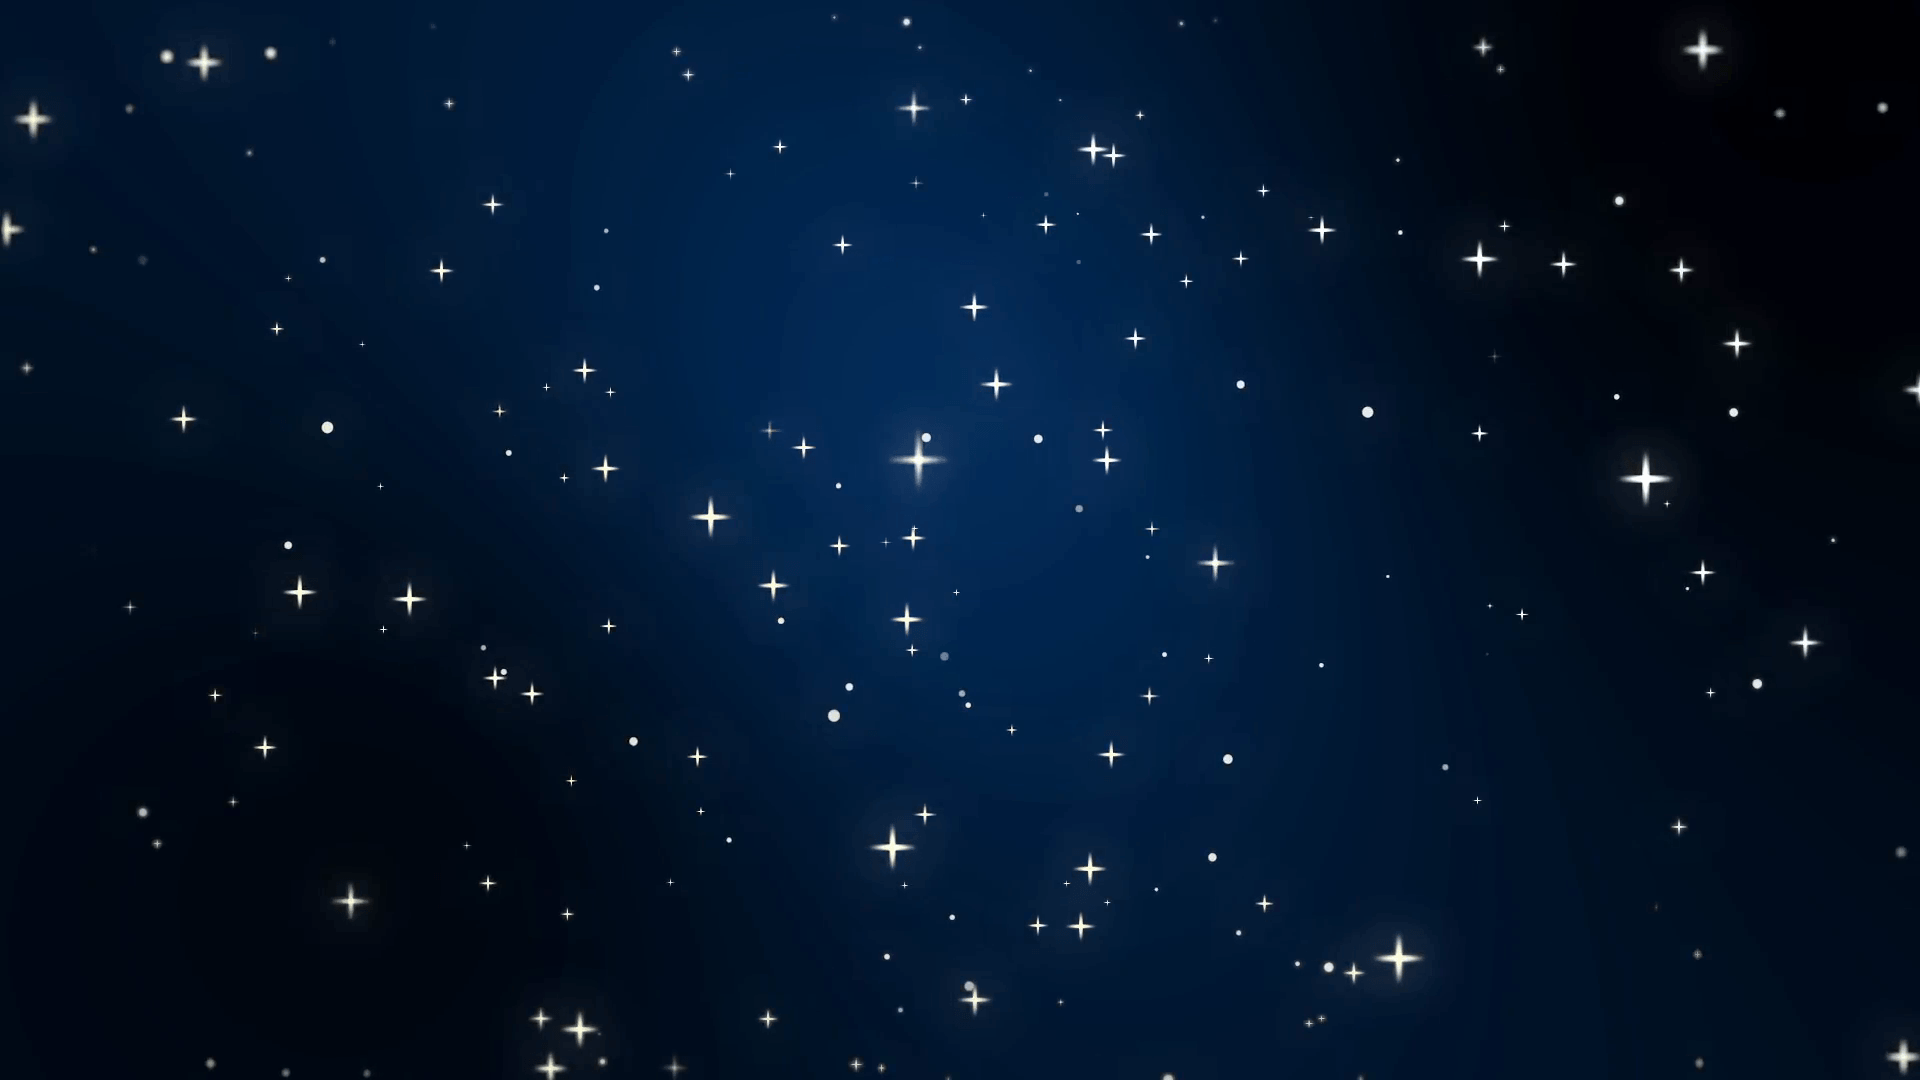 Dark Blue and Black Logo - night-sky-full-of-stars-animation-made-of-sparkly-light-particles ...